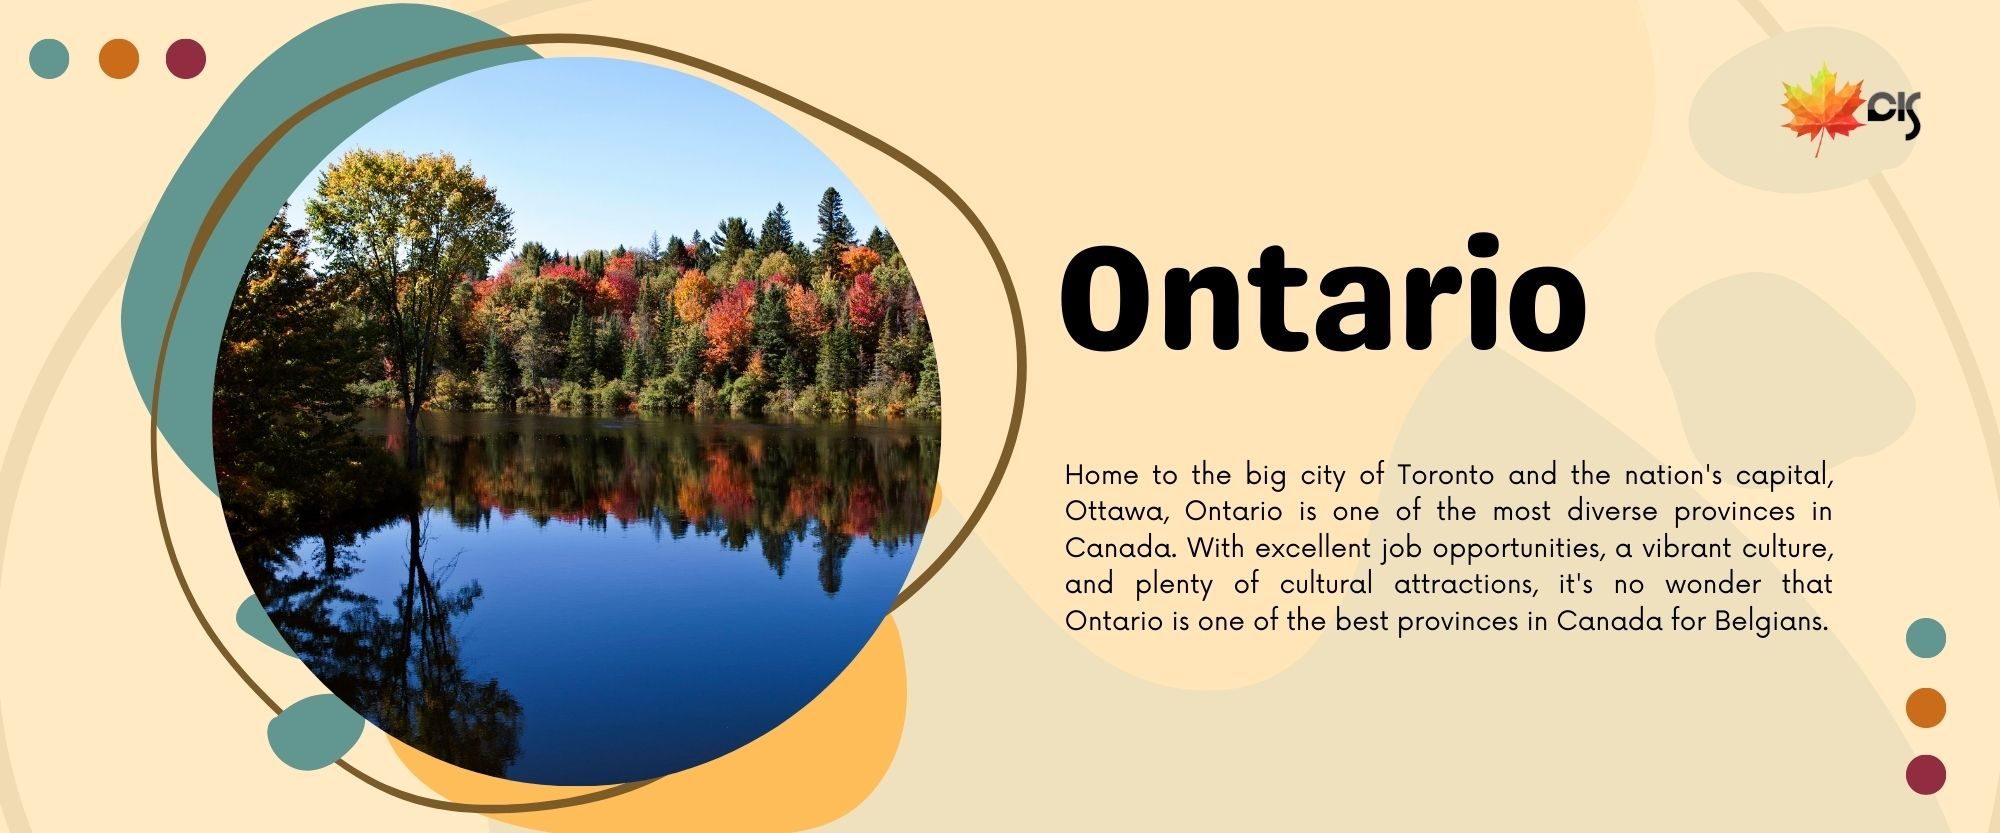 Home to the big city of Toronto and the nation's capital, Ottawa, Ontario is one of the most diverse provinces in Canada. With excellent job opportunities, a vibrant culture, and plenty of cultural attractions, it's no wonder that Ontario is one of the best provinces in Canada for Belgians.